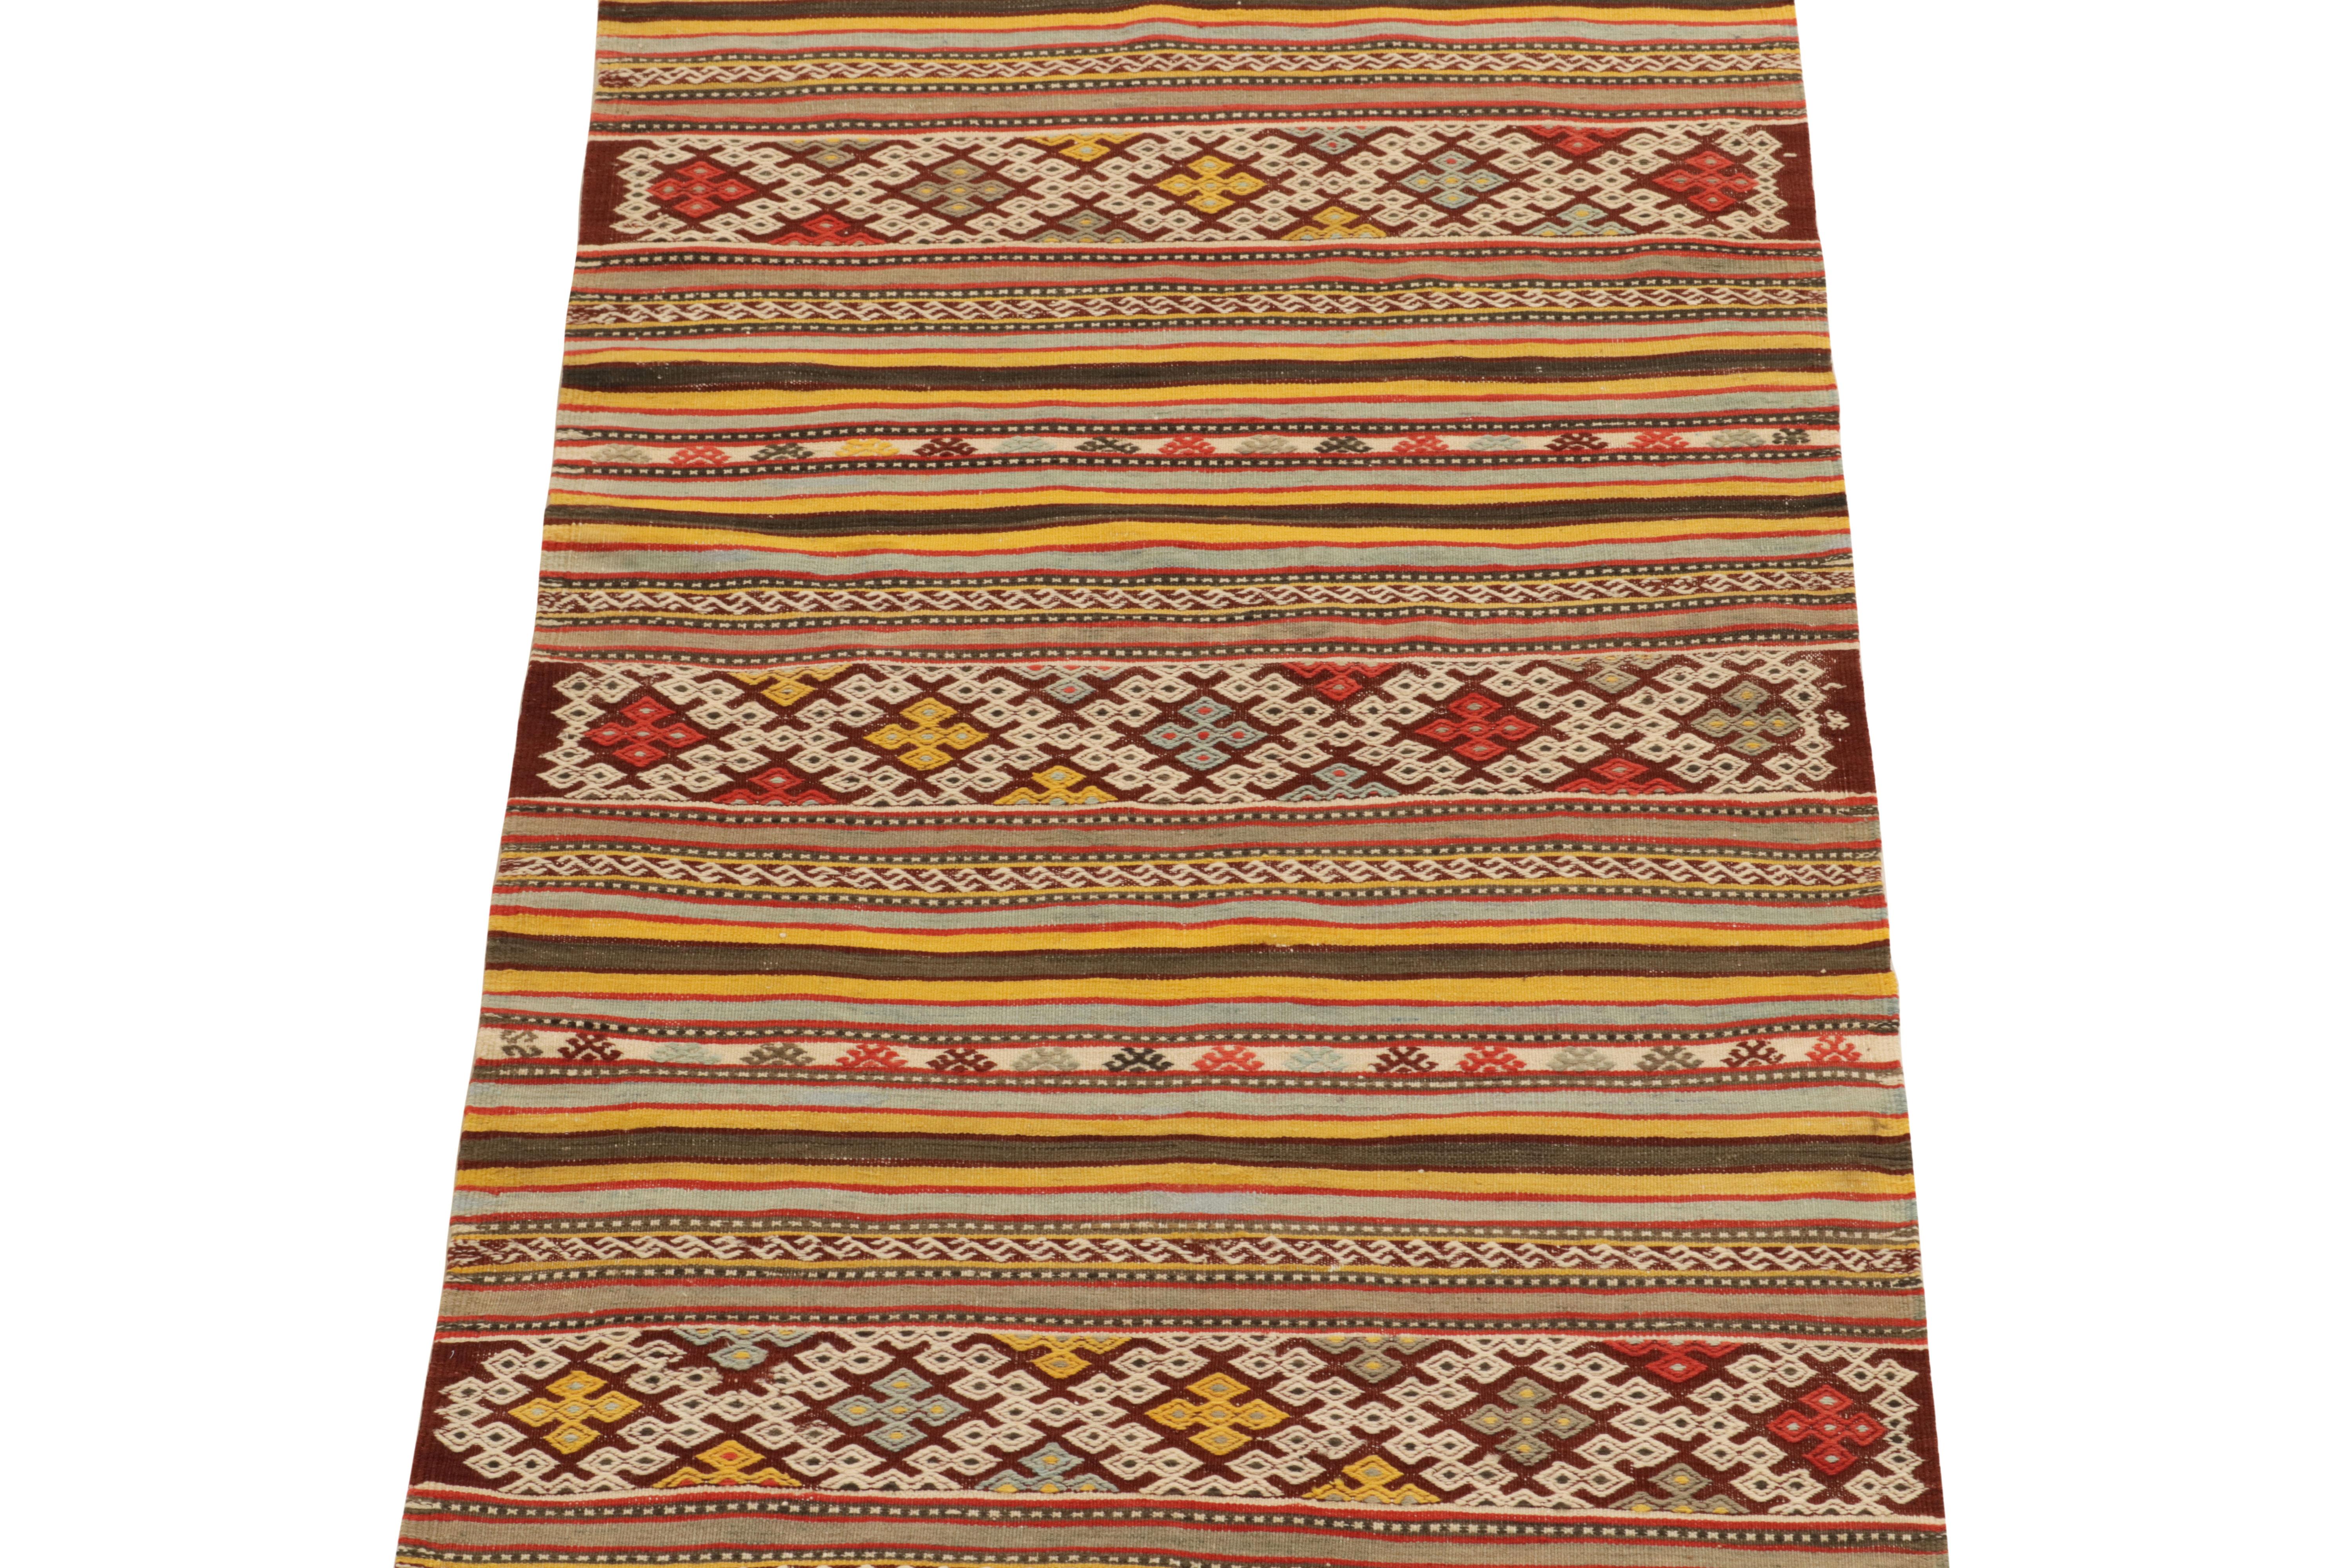 Vintage Turkish Kilim runner in Yellow, Red, Geometric Pattern by Rug & Kilim In Good Condition For Sale In Long Island City, NY